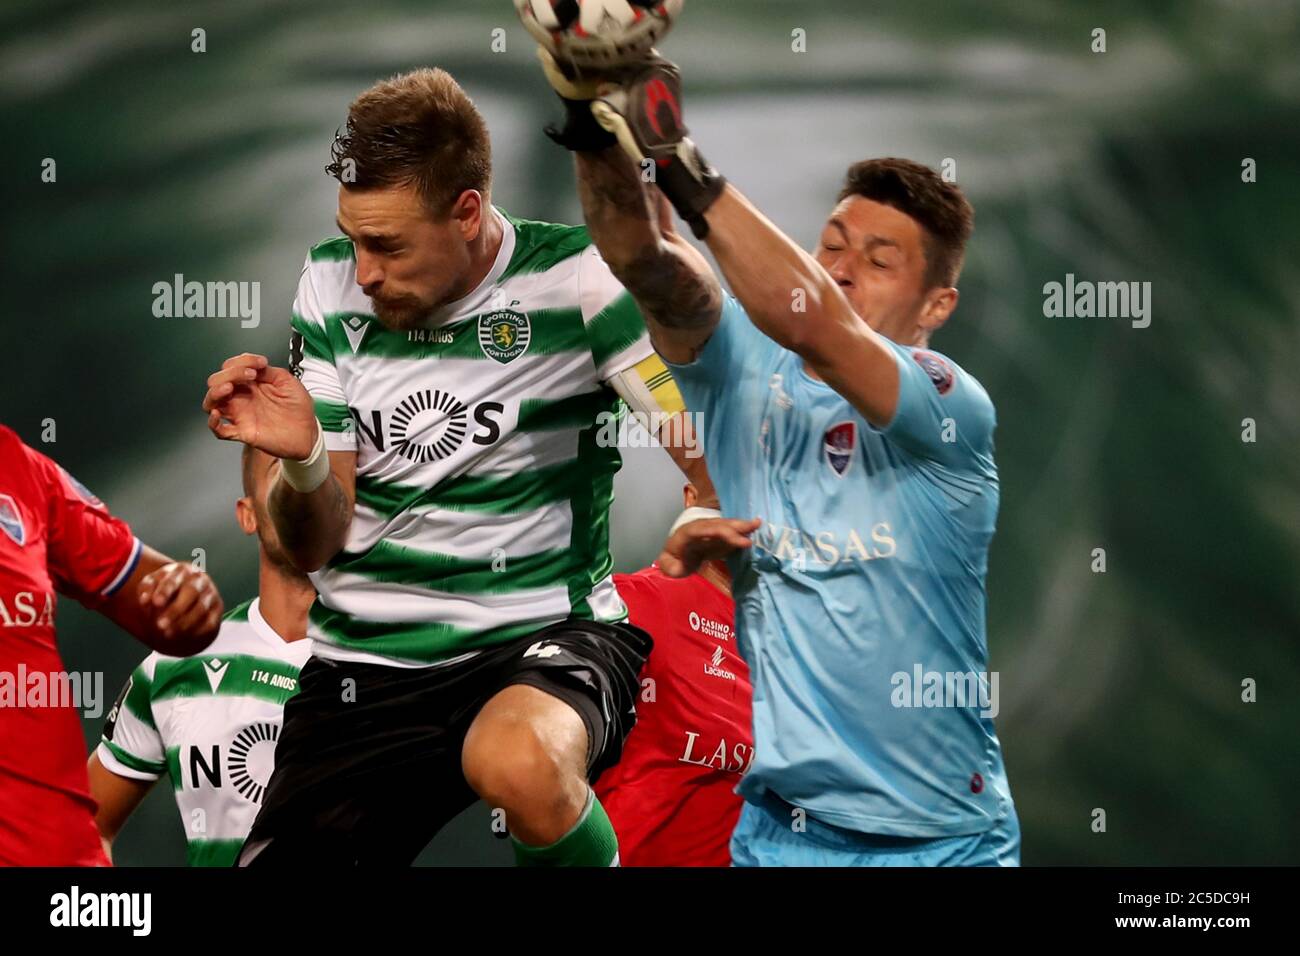 Lisbon, Wednesday. 1st July, 2020. Sebastian Coates (L) of Sporting vies with Denis, goalkeeper of Gil Vicente during a Portuguese League football match between Sporting CP and Gil Vicente in Lisbon, Portugal, Wednesday, July 1, 2020. Credit: Pedro Fiuza/Xinhua/Alamy Live News Stock Photo